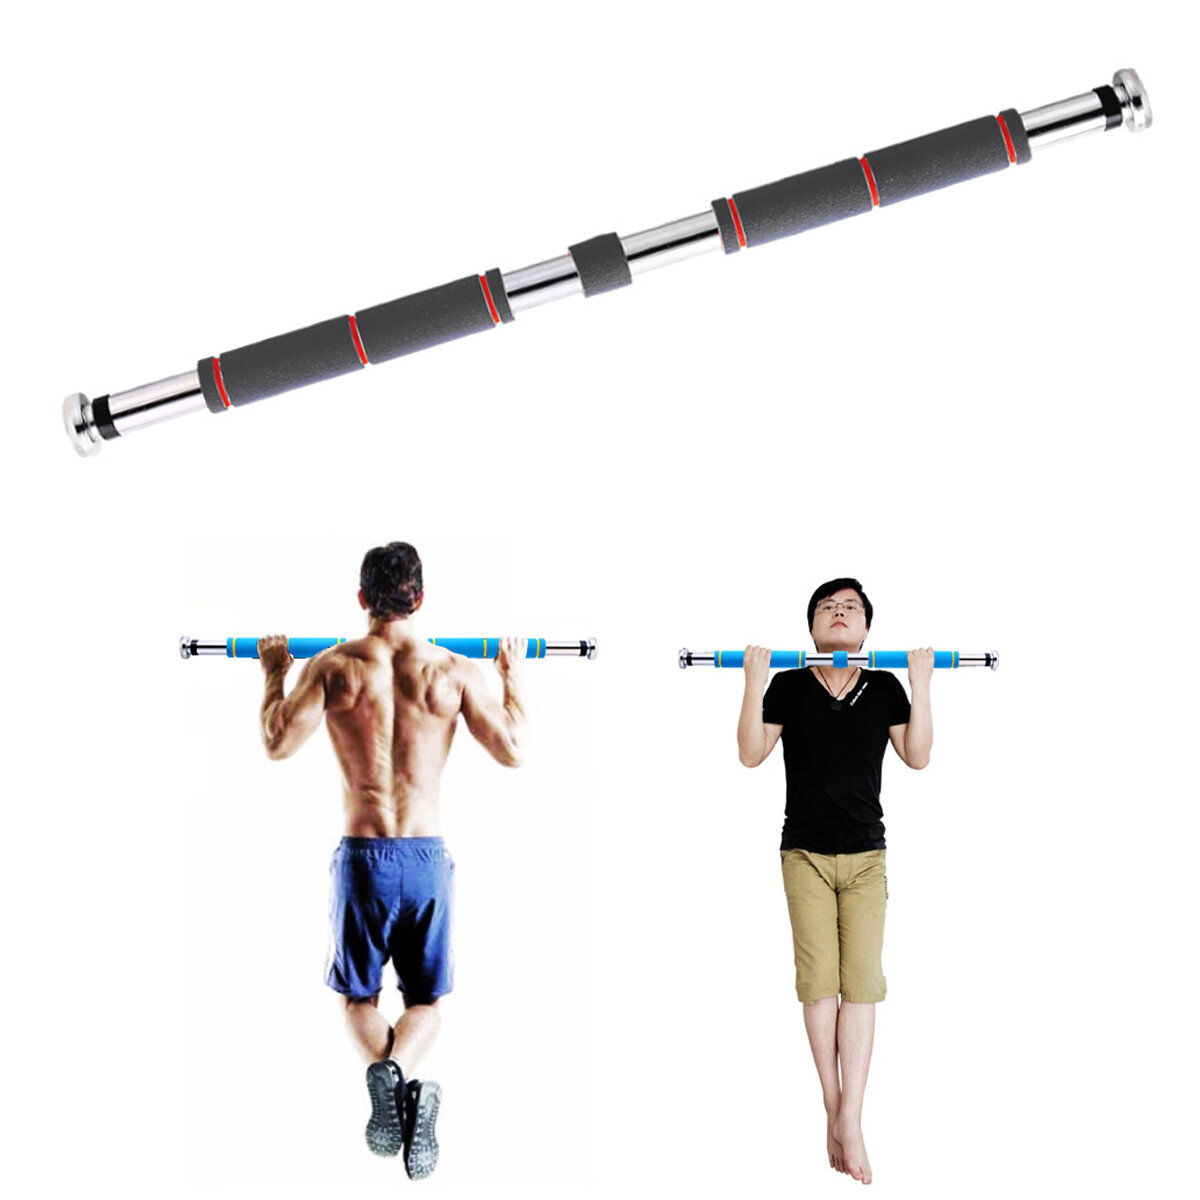 

Home Door Mounted Chin-up Bar Horizontal Bar Gym Fitness Muscle Training Pull Up Stand Exercise Tools